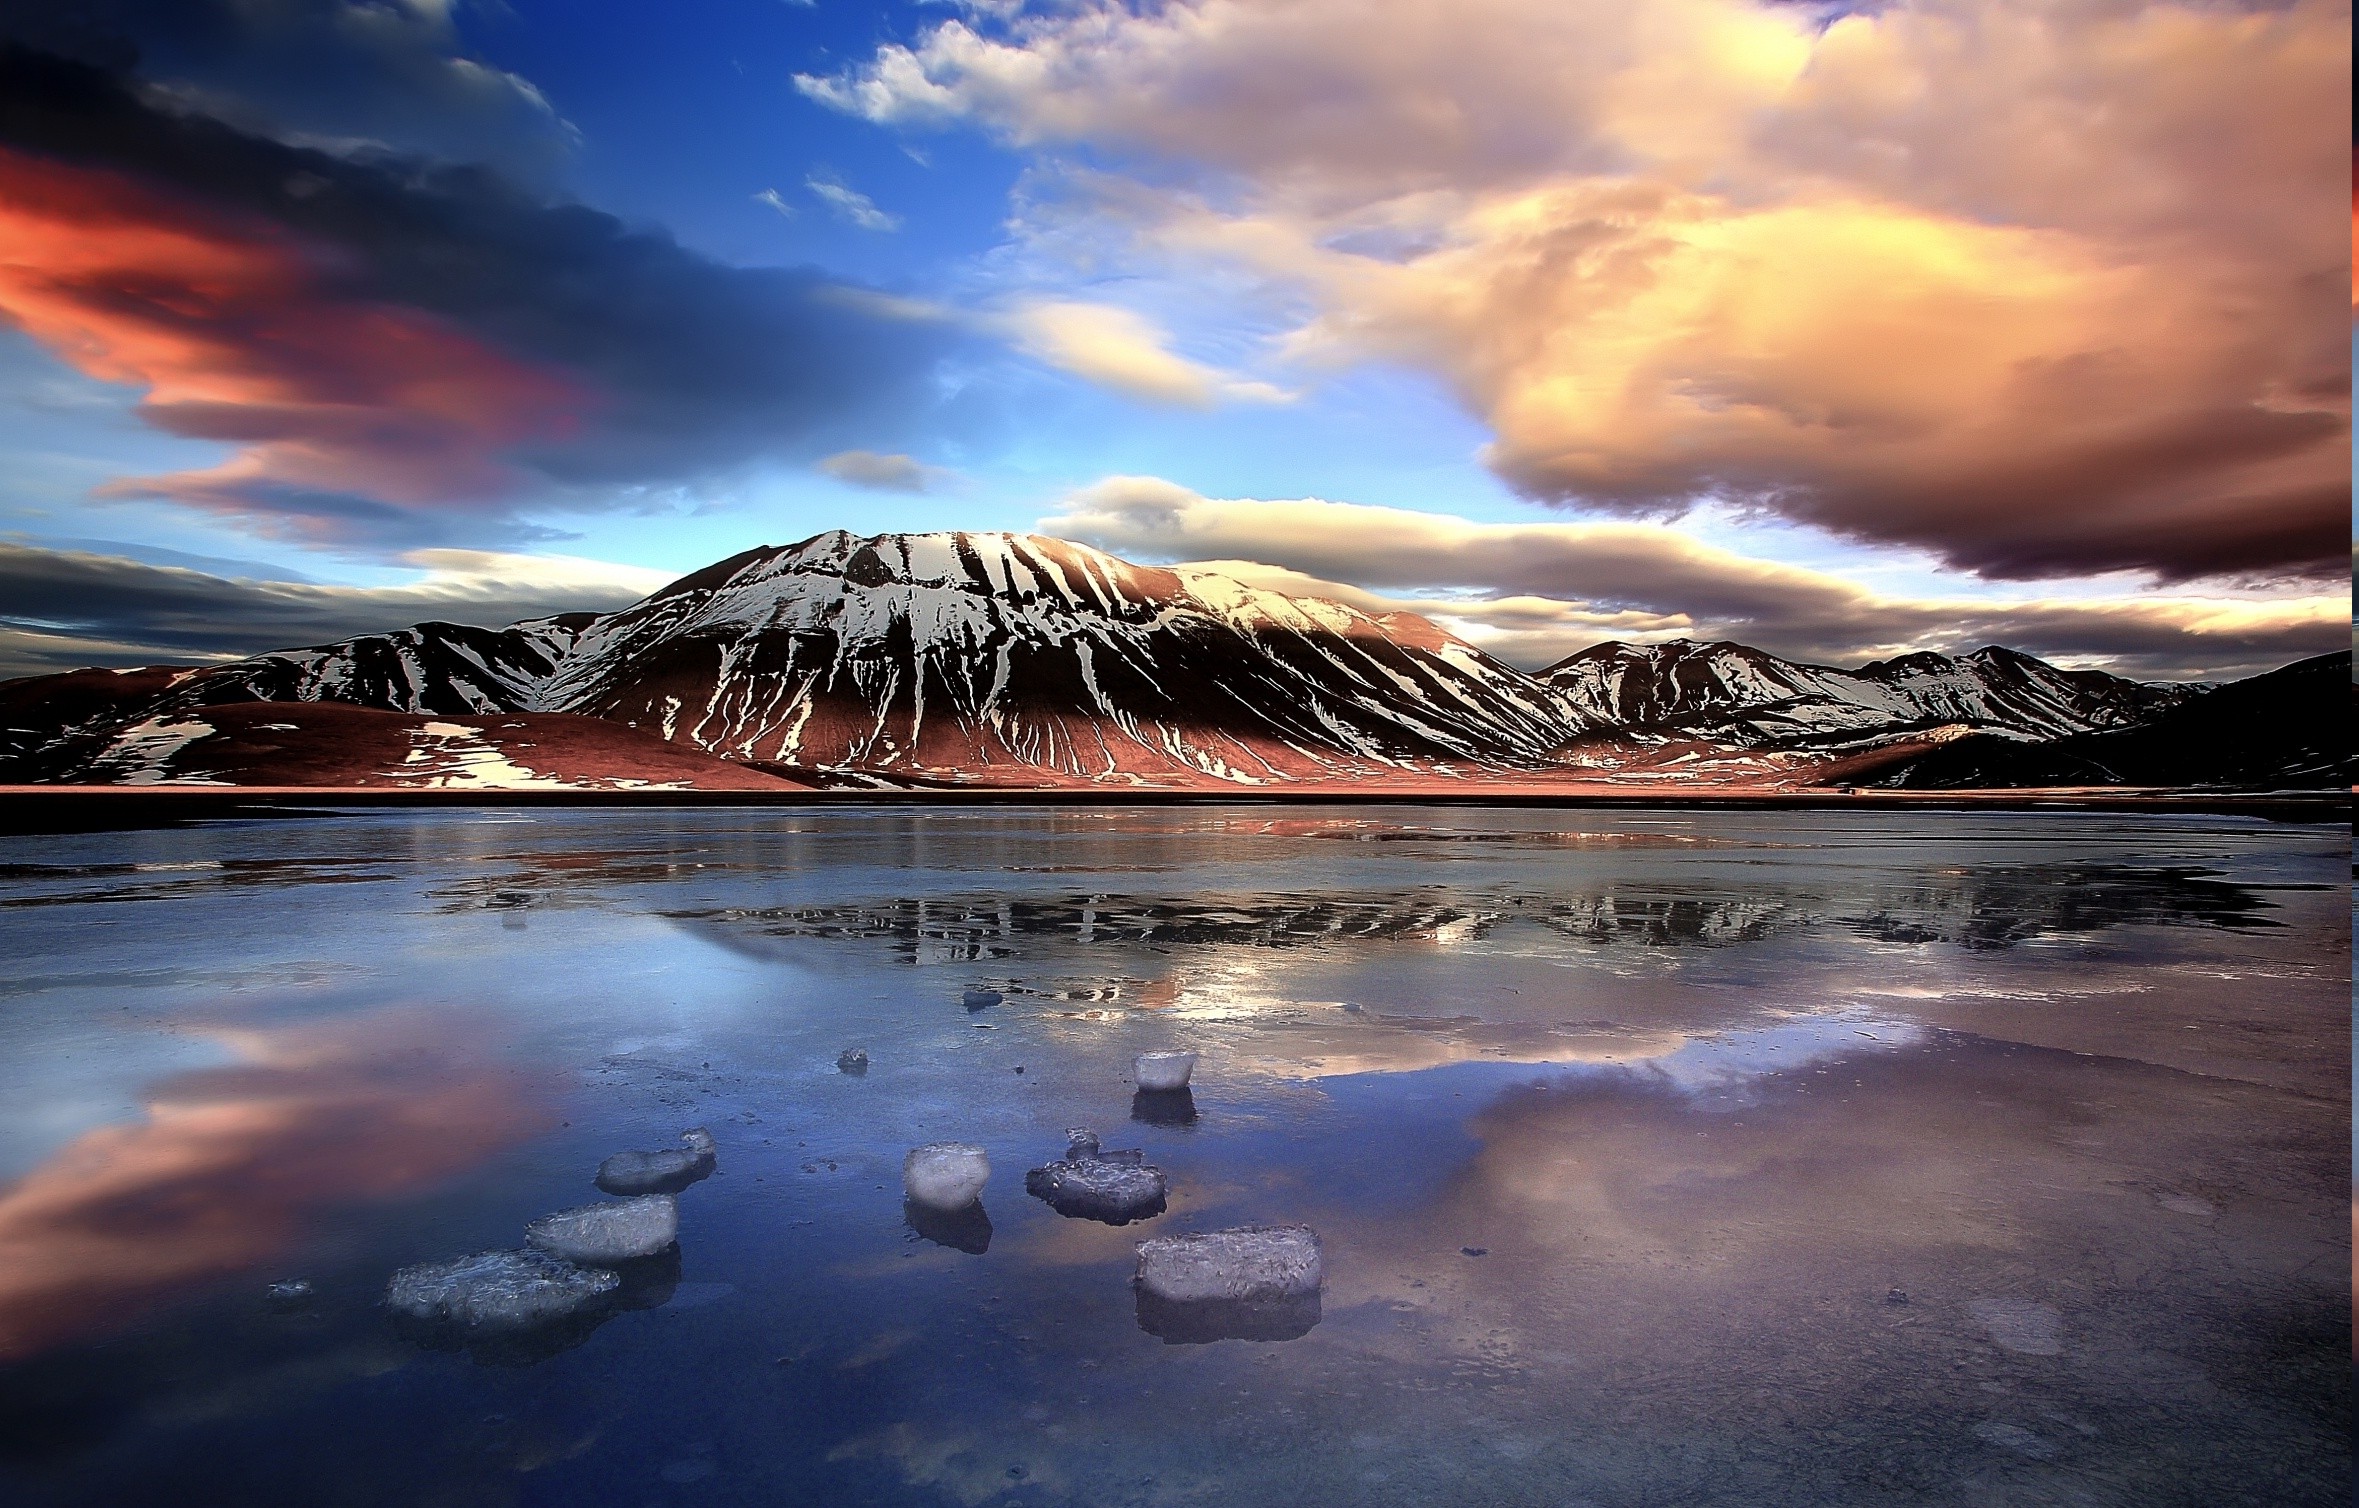 Italy, Mountain, Clouds, Lake, Winter, Ice, Sunset, Snowy Peak, Frost, Nature, Landscape Wallpaper